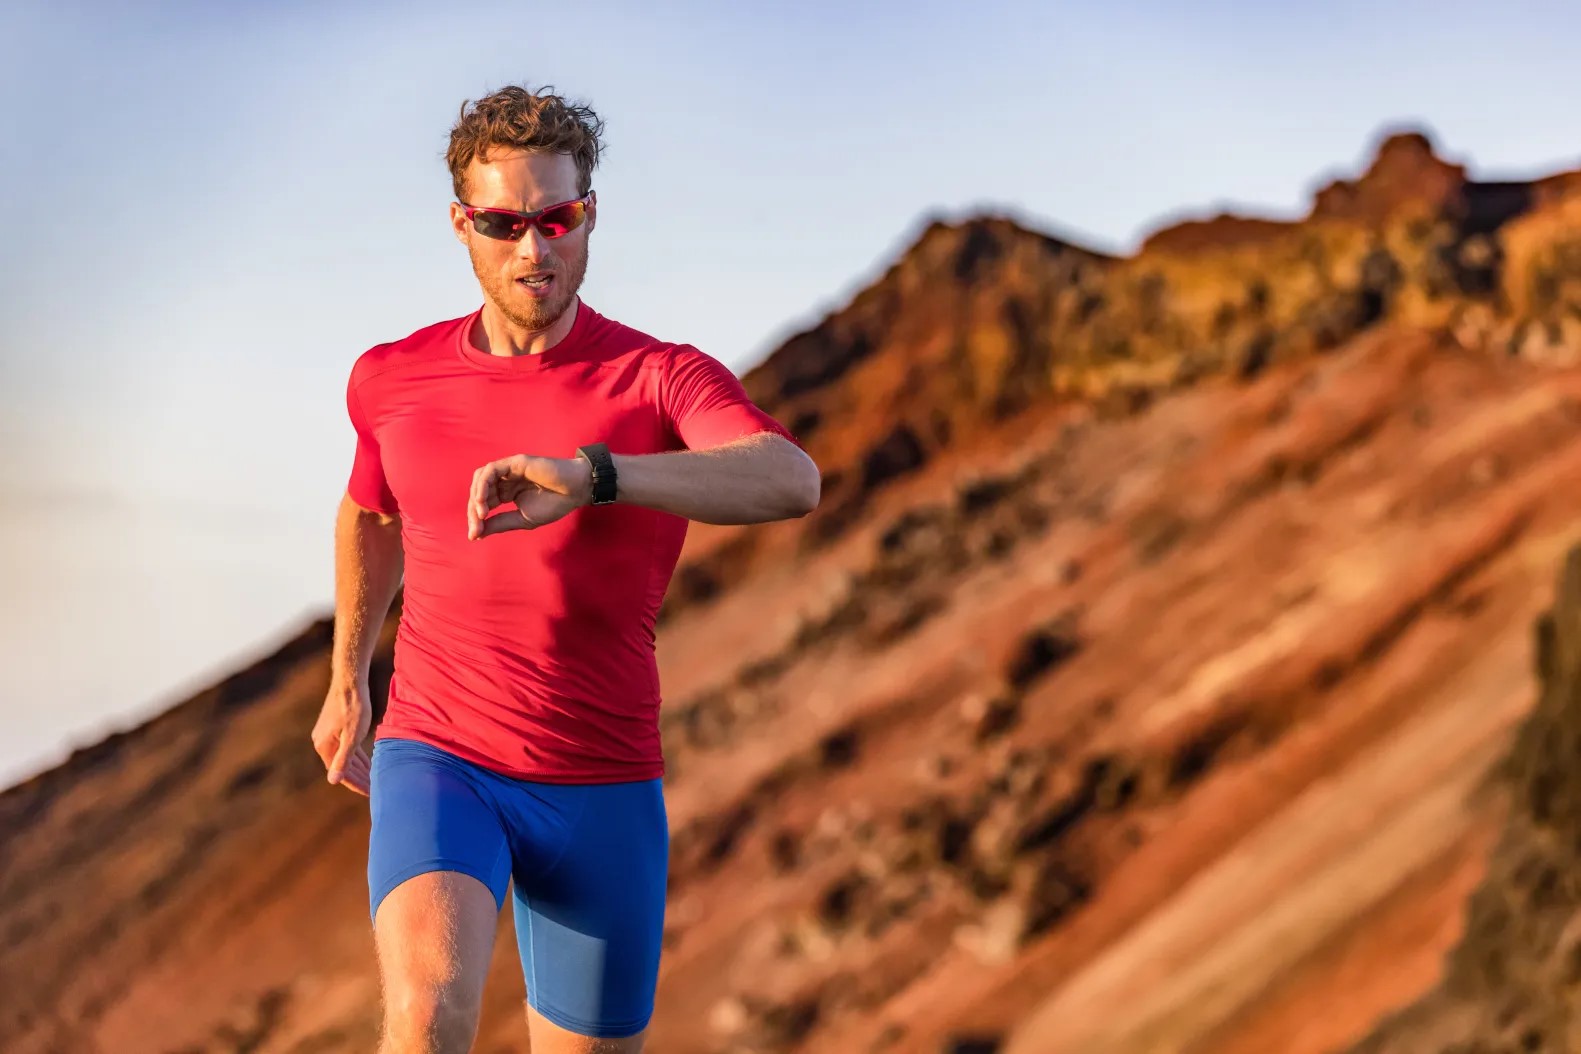 Top Picks For The Best Running Sunglasses: Protect Your Eyes And Enhance Your Performance